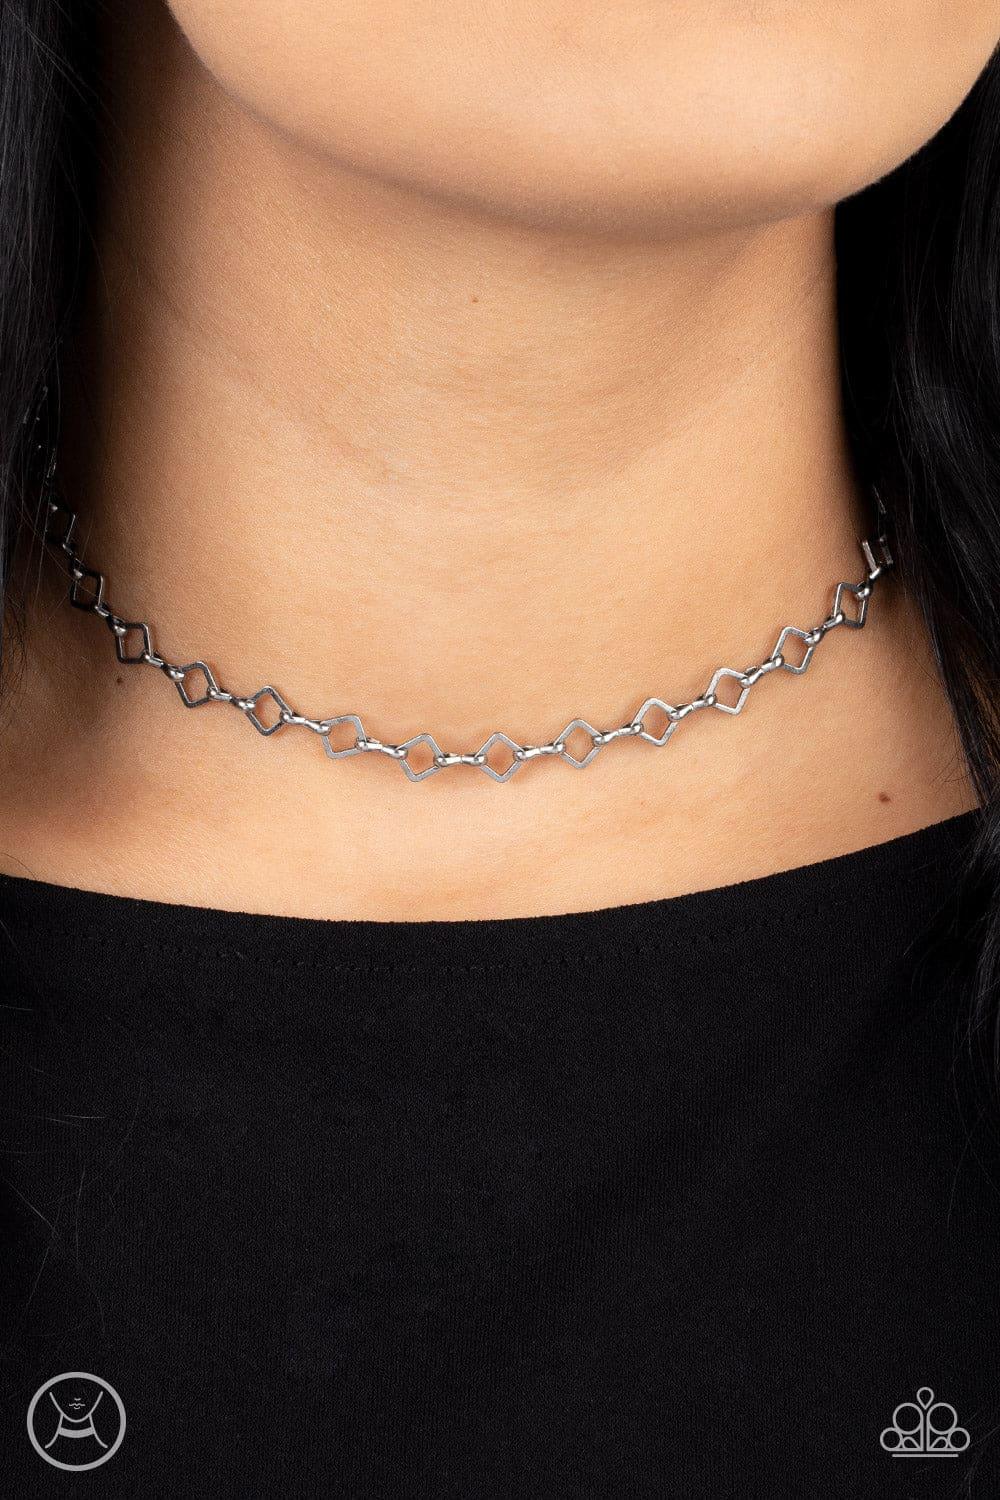 Paparazzi Accessories - A-frame A-game - Silver Choker Necklace - Bling by JessieK